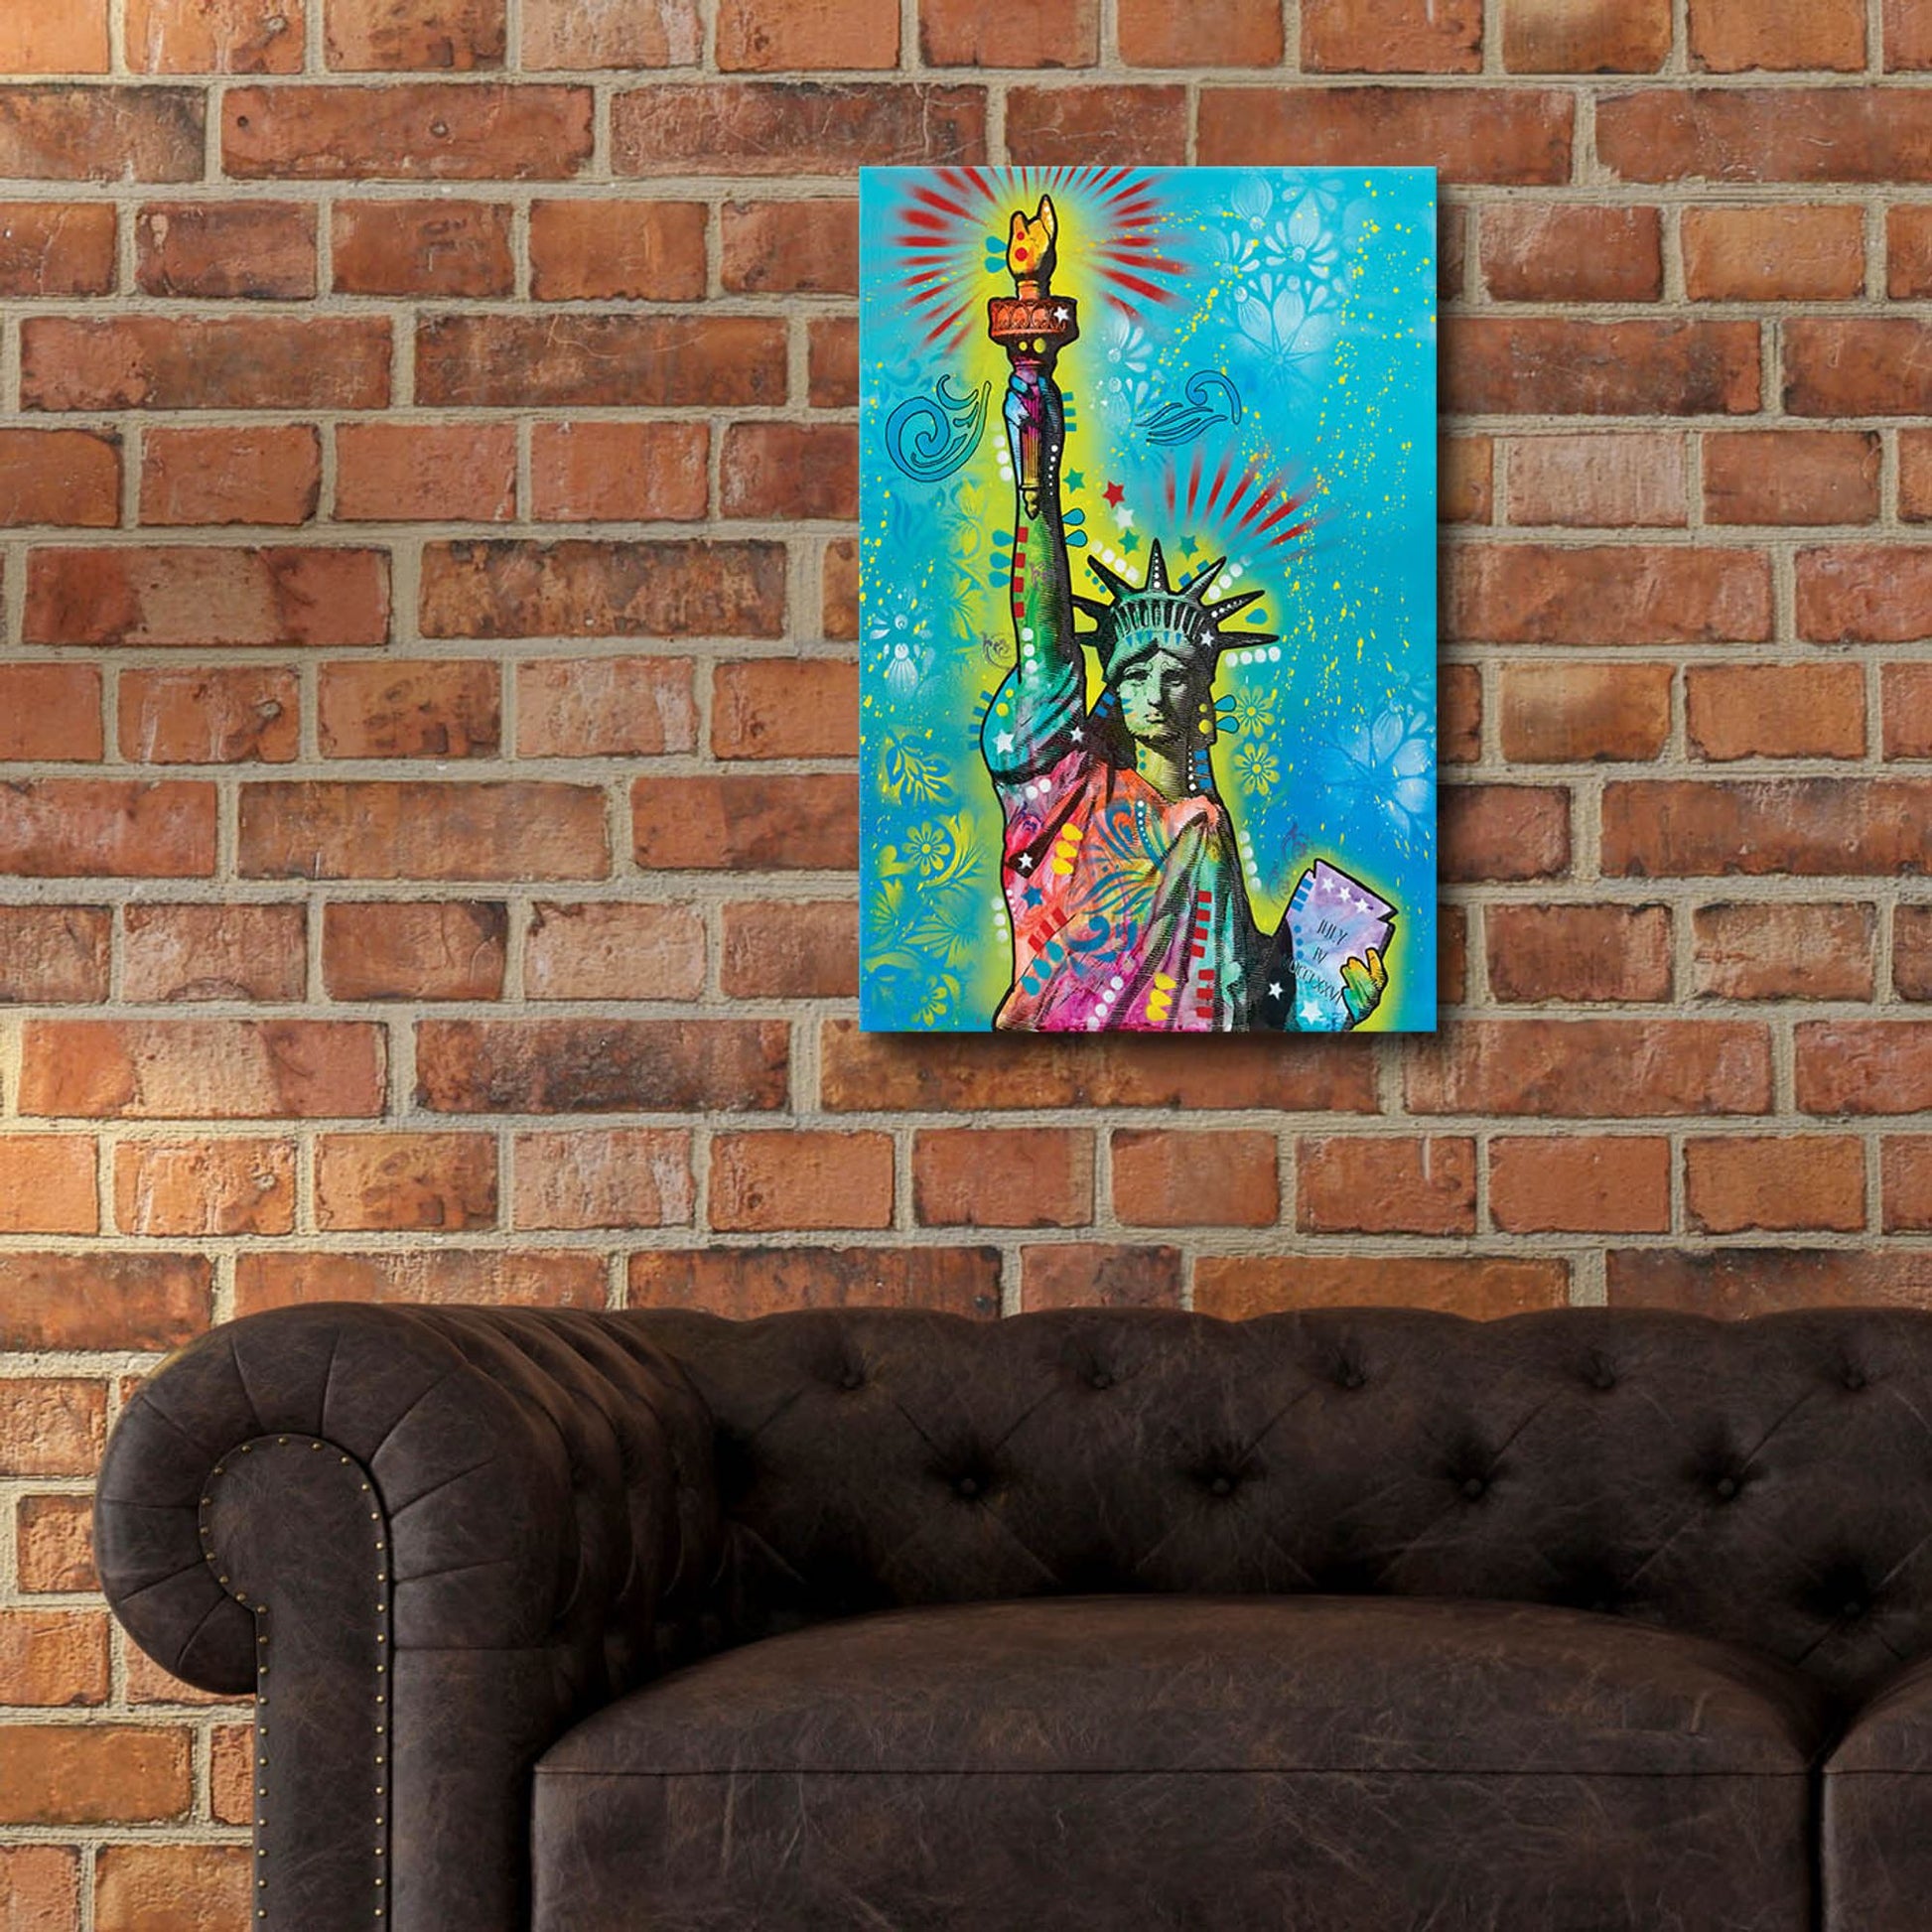 Epic Art 'Lady Liberty' by Dean Russo, Acrylic Glass Wall Art,16x24